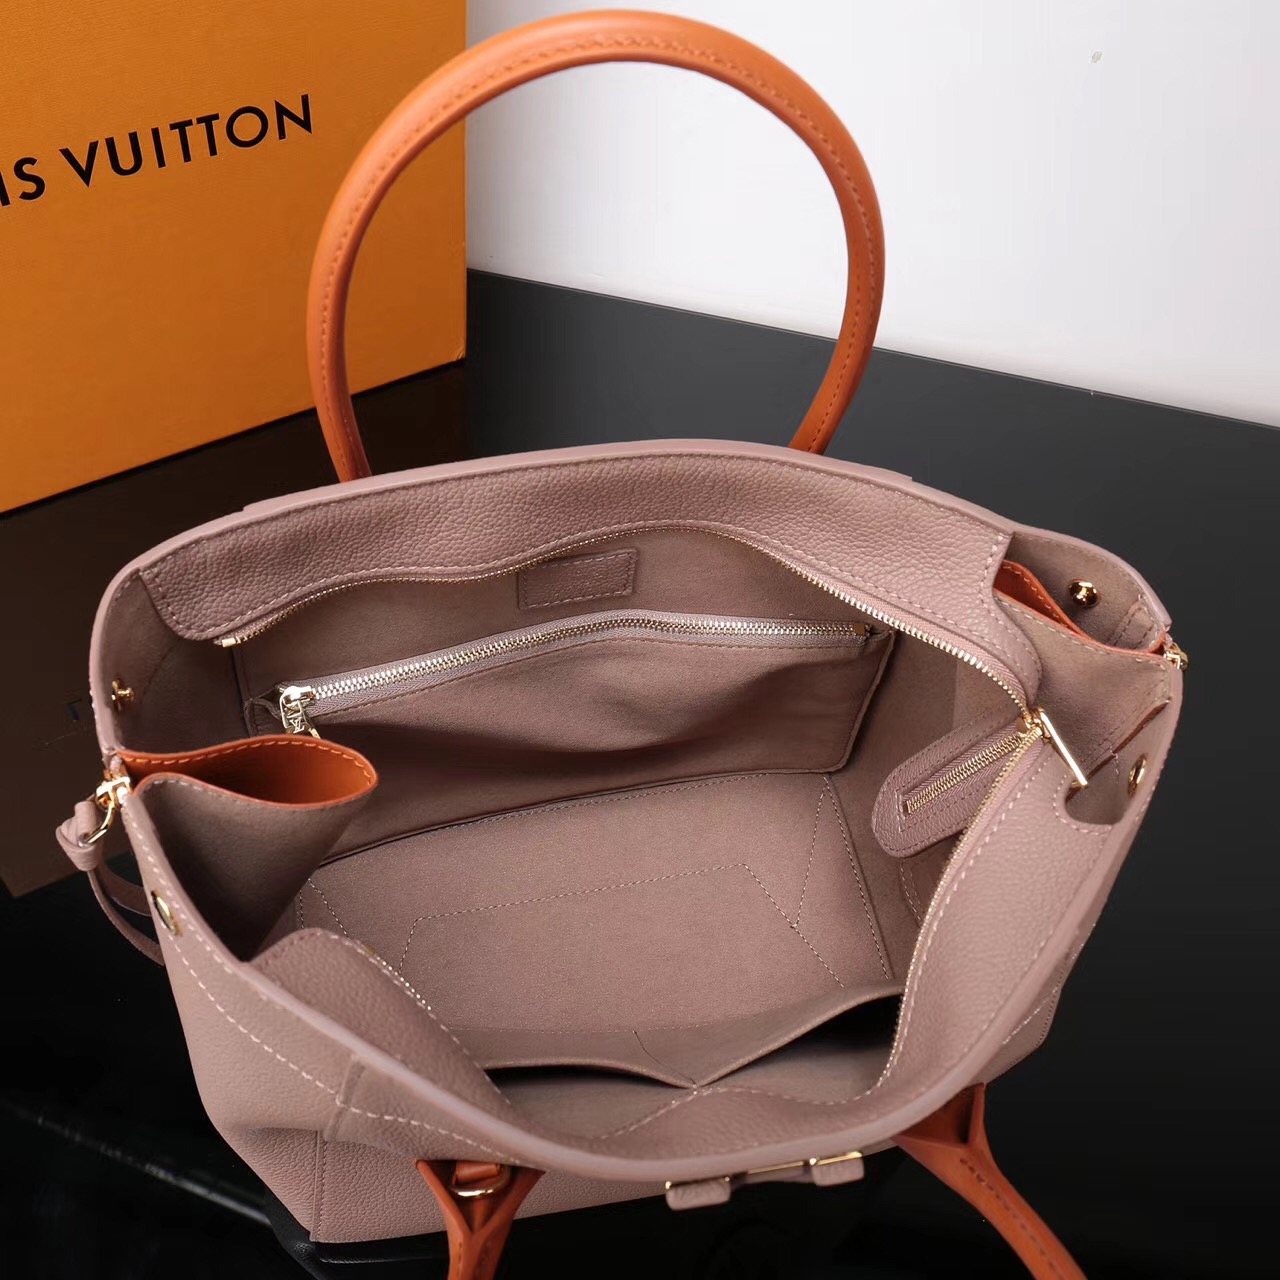 LV Louis Vuitton M54841 Freedom Tote Leather Handbags Real bags Beige [LV1018] - $339.00 ...